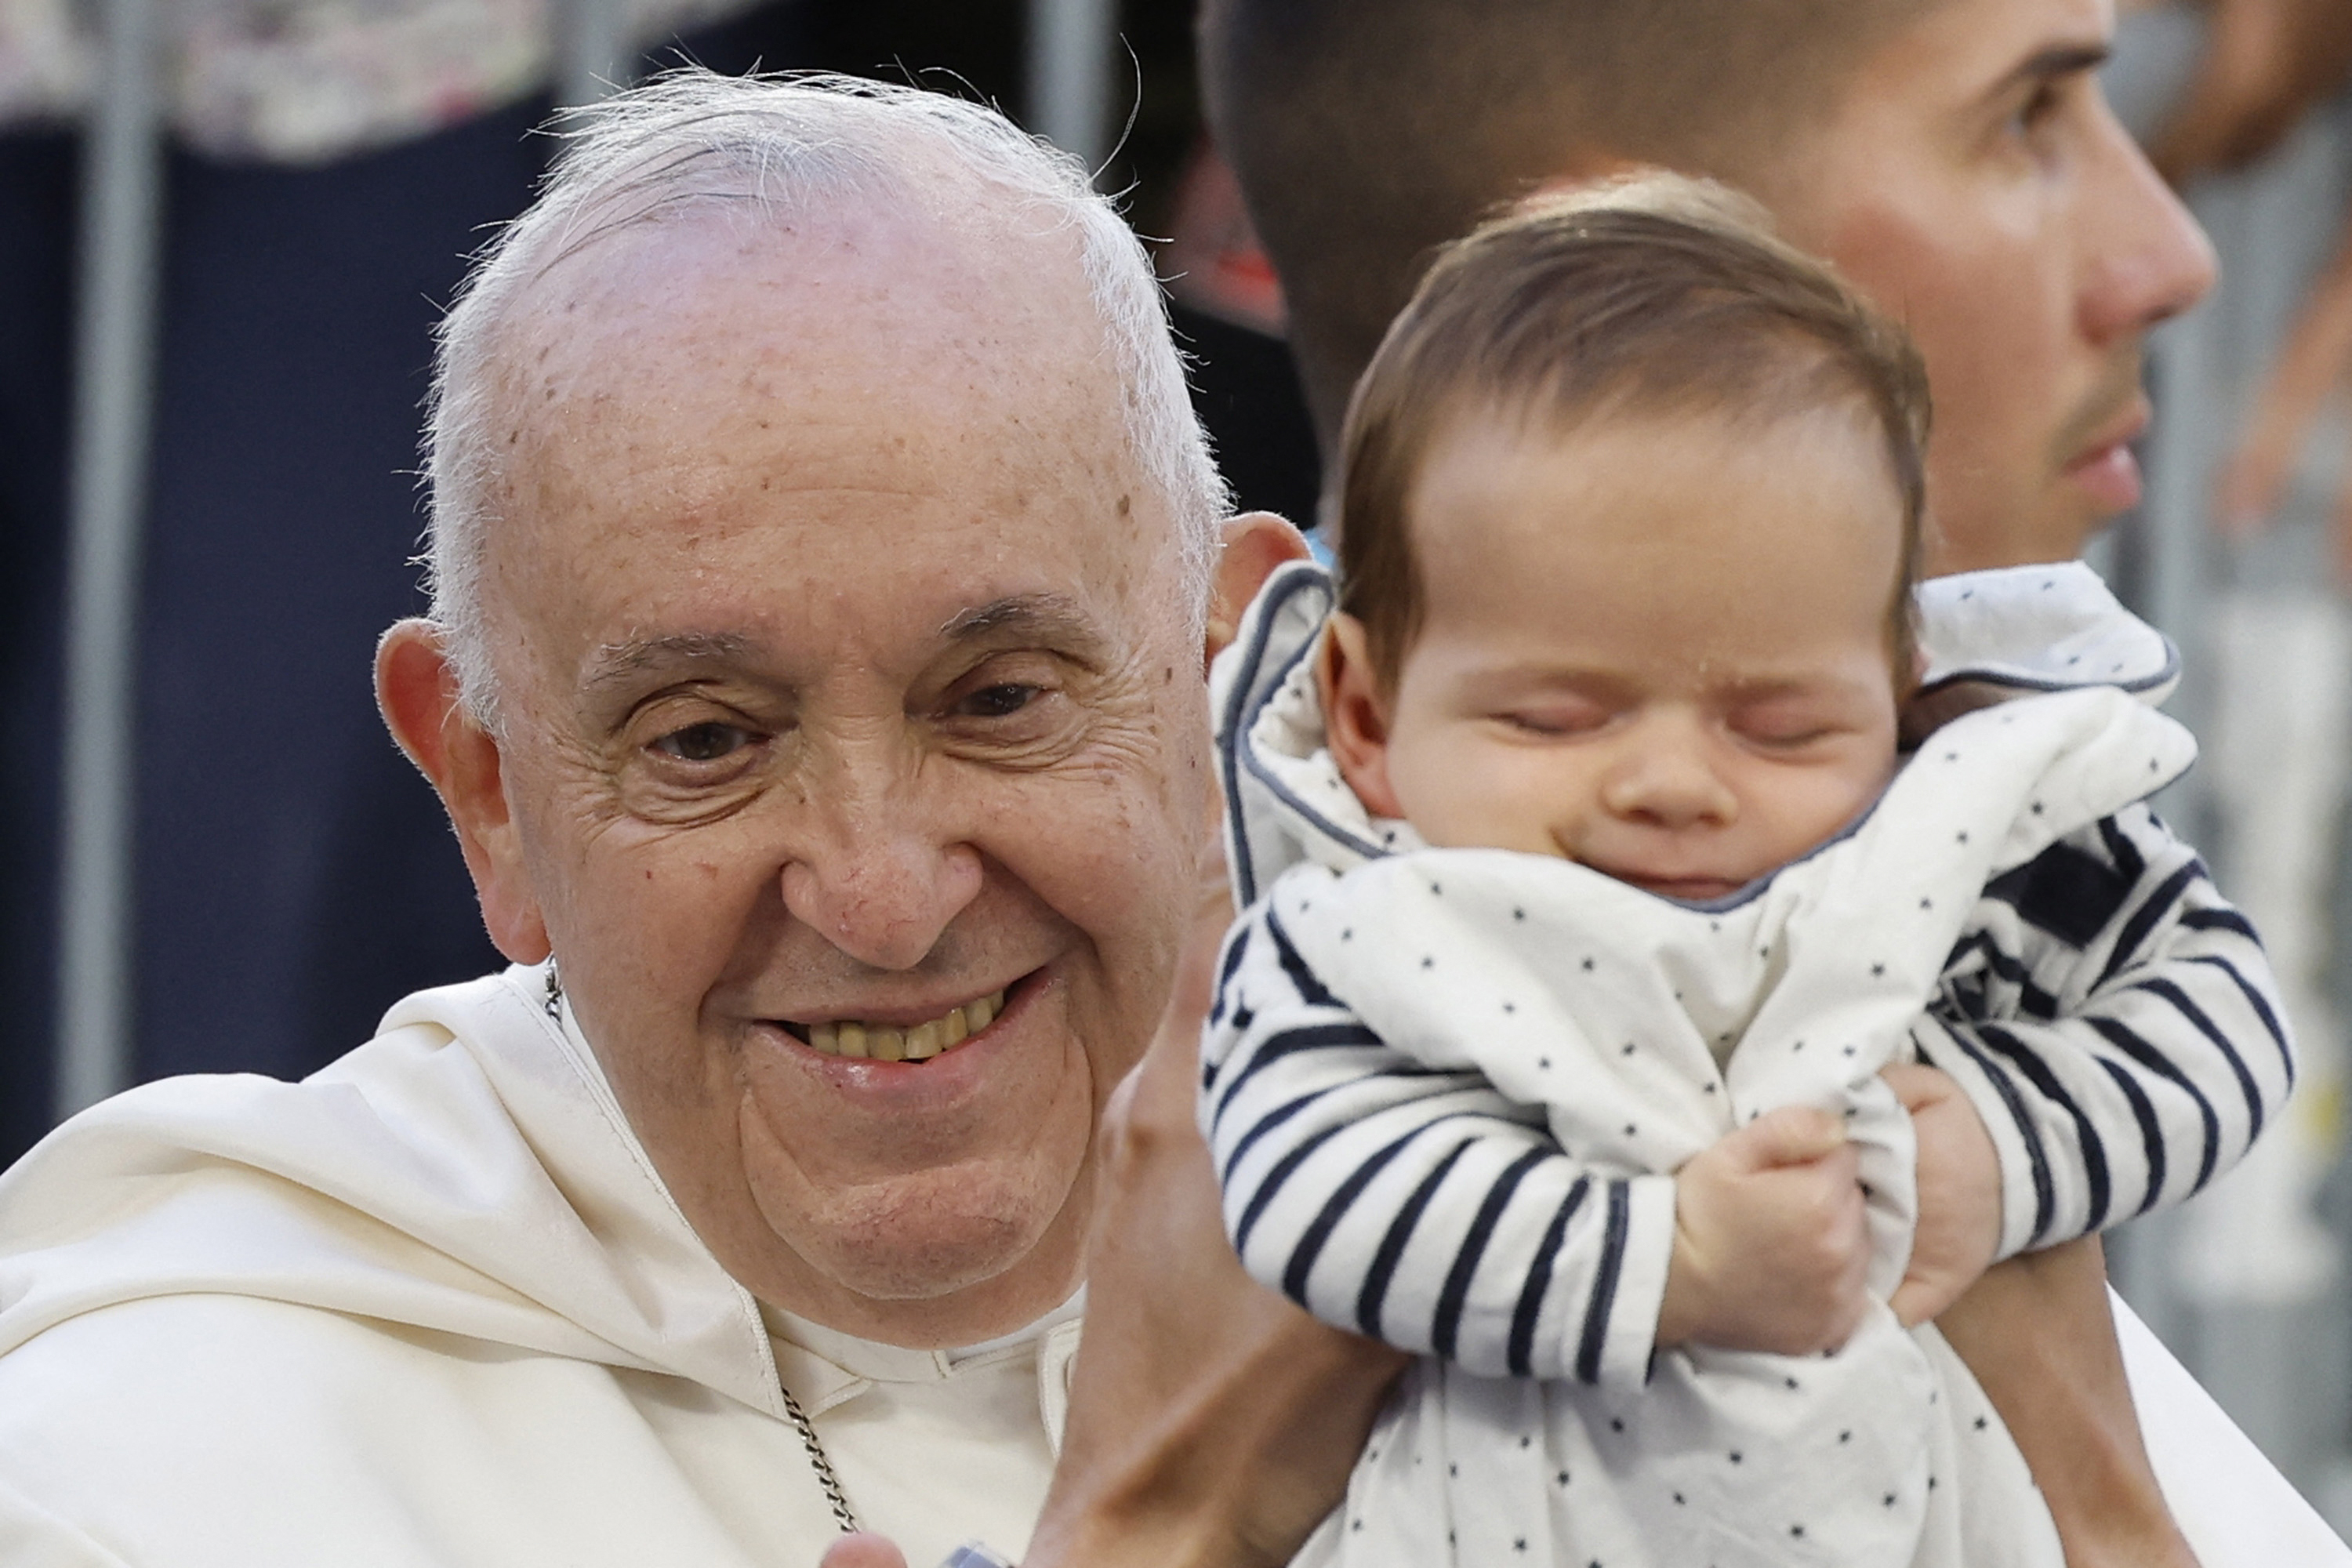 A baby is held up to Pope Francis as he arrives at the Velodrome stadium in his popemobile for a mass in the southern port city of Marseille